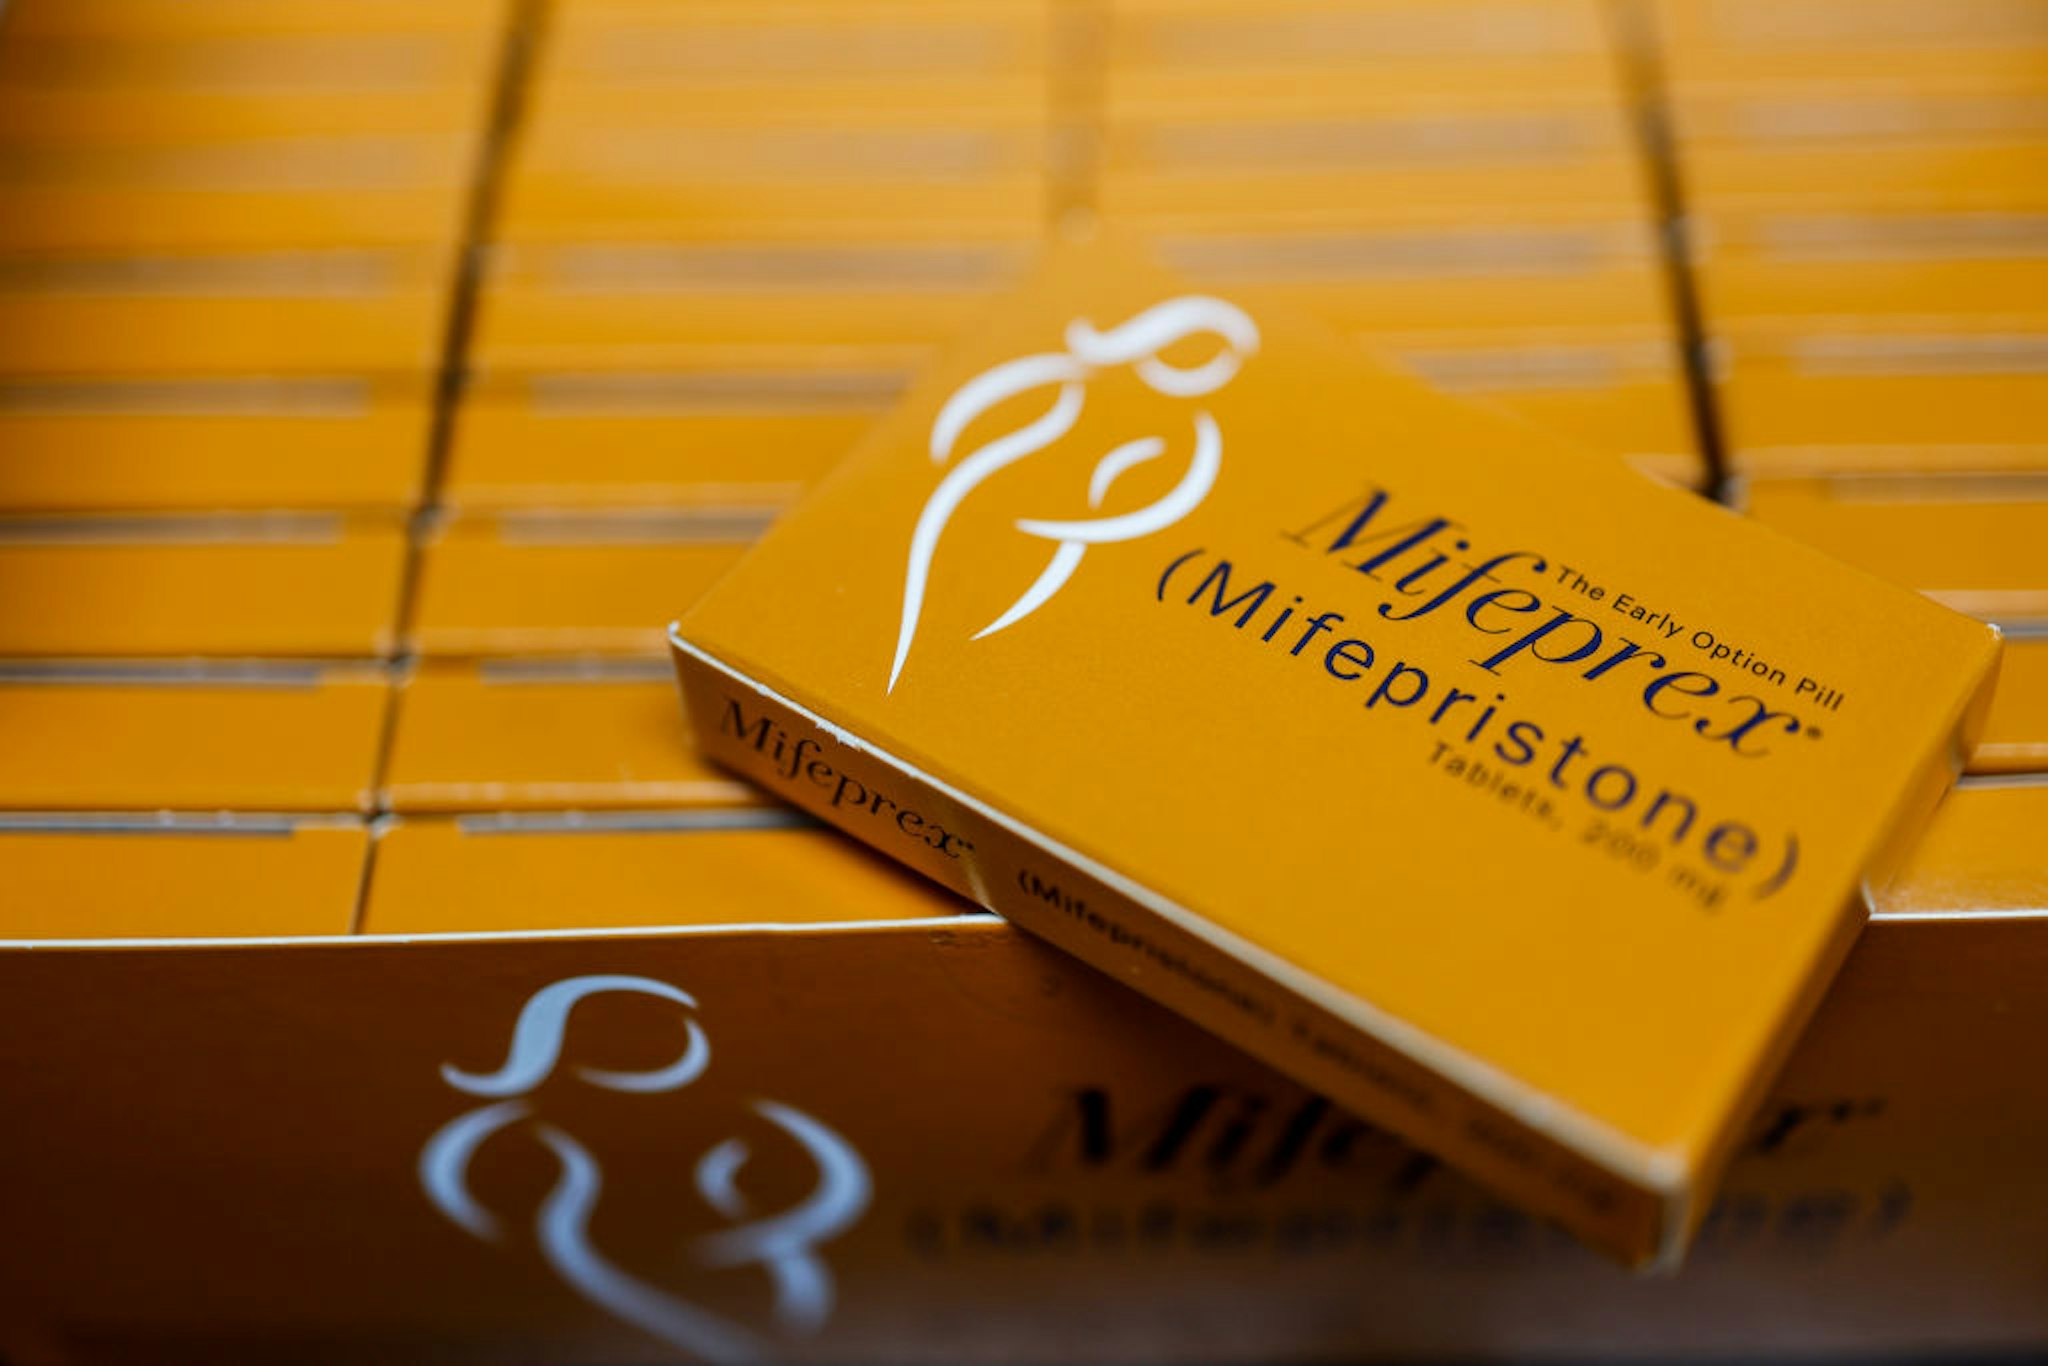 ROCKVILLE, MARYLAND - APRIL 13: In this photo illustration, packages of Mifepristone tablets are displayed at a family planning clinic on April 13, 2023 in Rockville, Maryland. A Massachusetts appeals court temporarily blocked a Texas-based federal judge’s ruling that suspended the FDA’s approval of the abortion drug Mifepristone, which is part of a two-drug regimen to induce an abortion in the first trimester of pregnancy in combination with the drug Misoprostol.